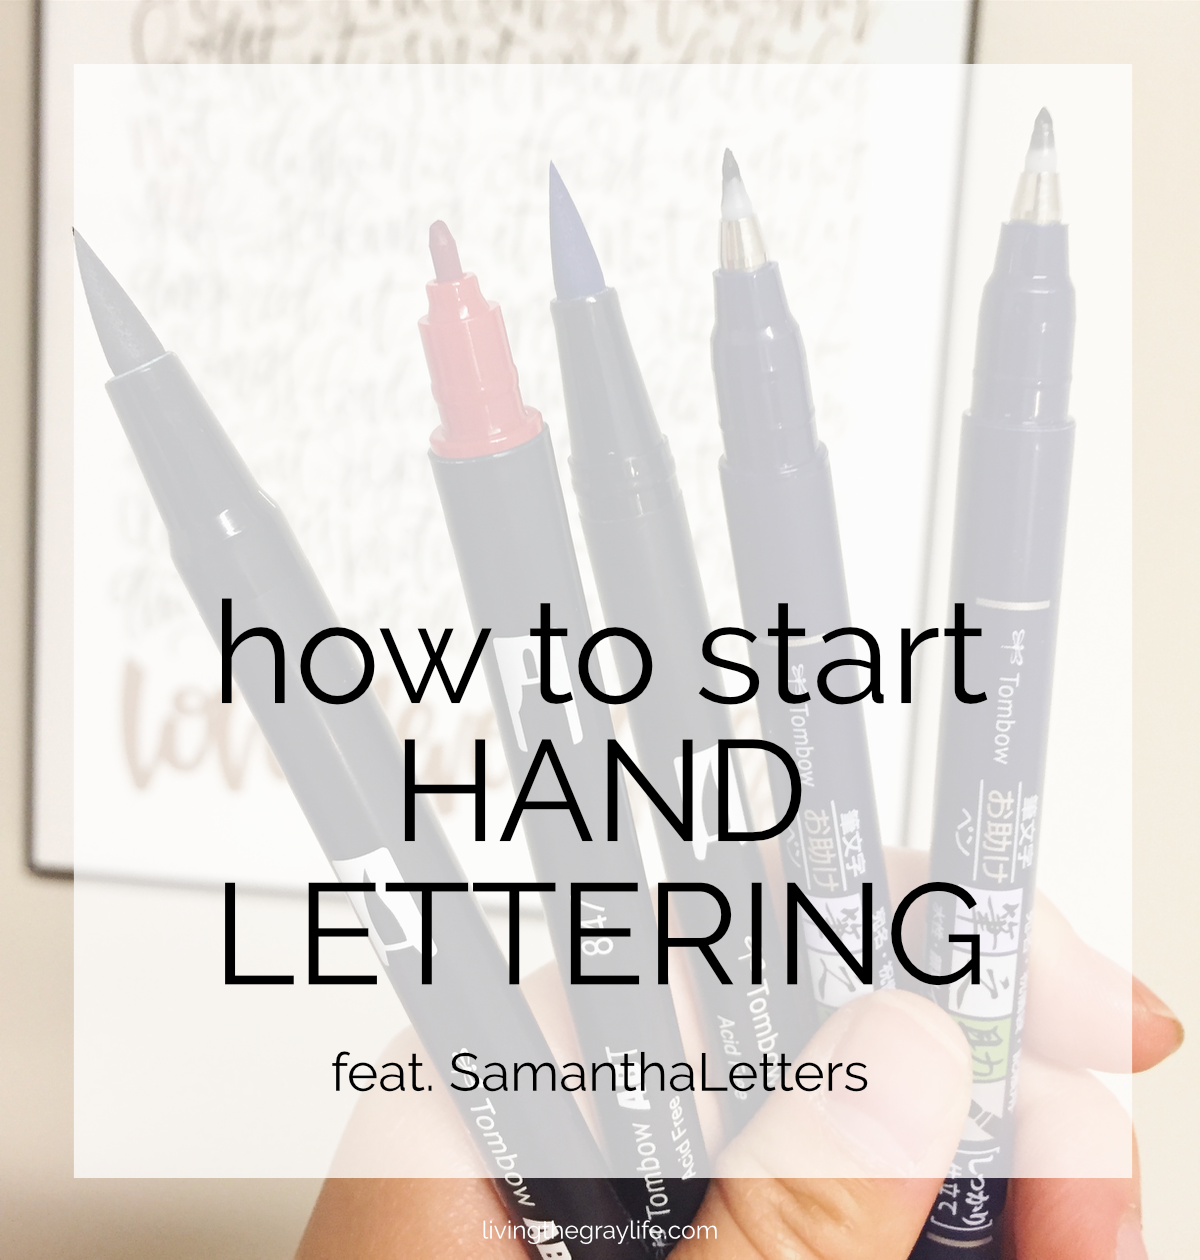 Love hand lettering but have no idea where to start? Check out these tips for beginner hand lettering brought to you by SamanthaLetters!